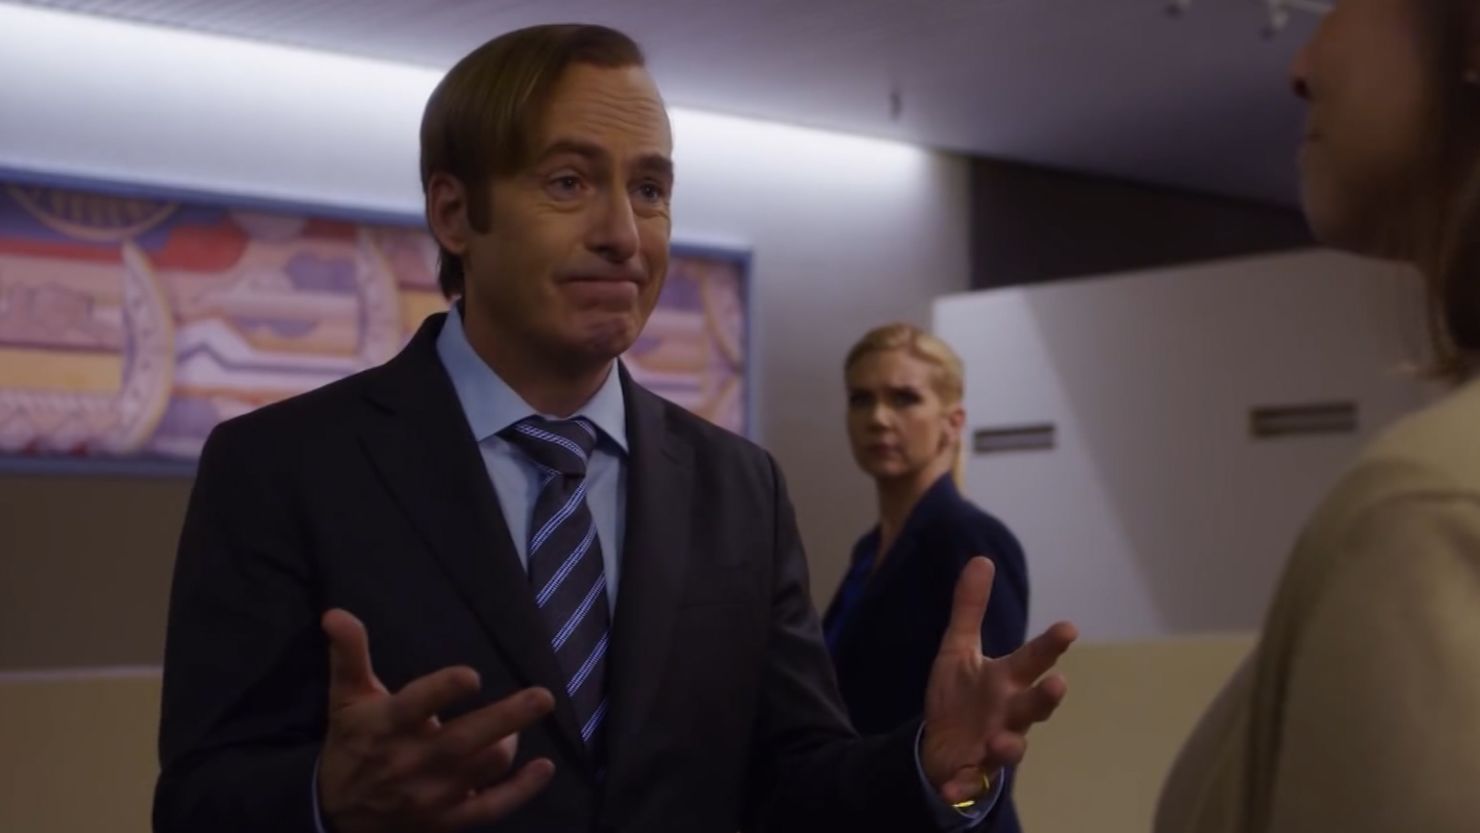 2020 shows better call saul